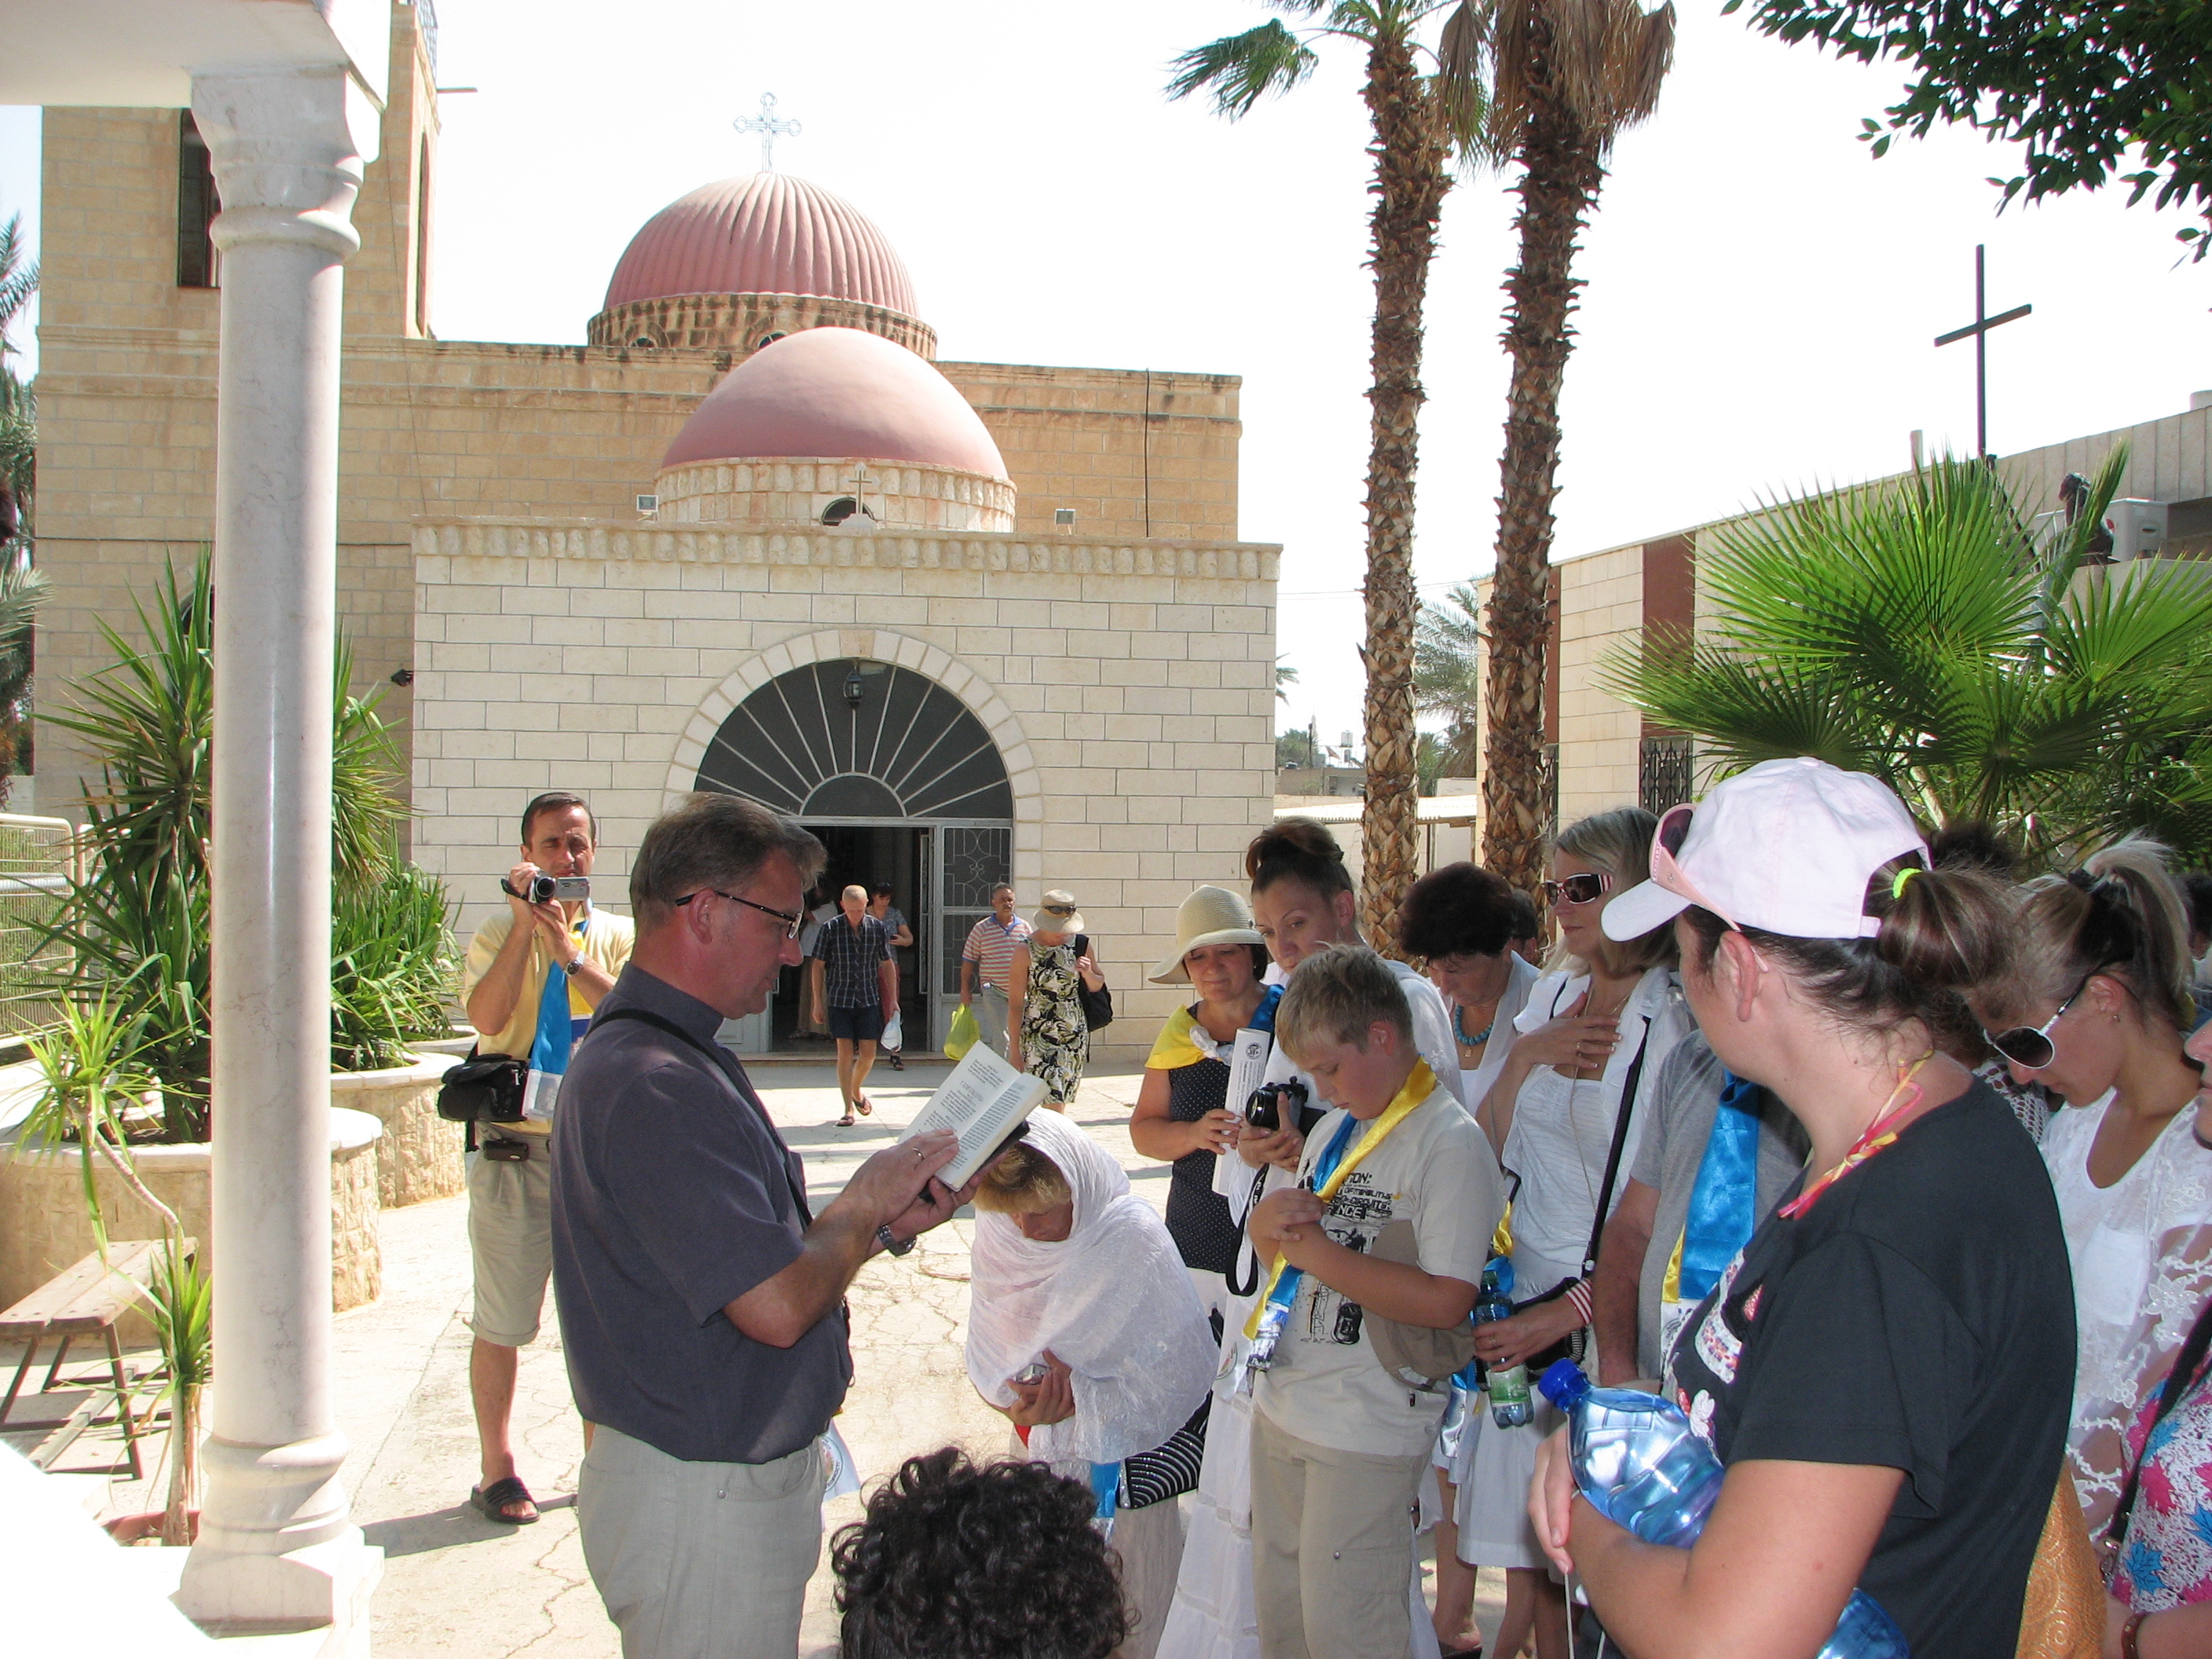 Christian pilgrims in Jericho, Israel, 2011, picture 2.